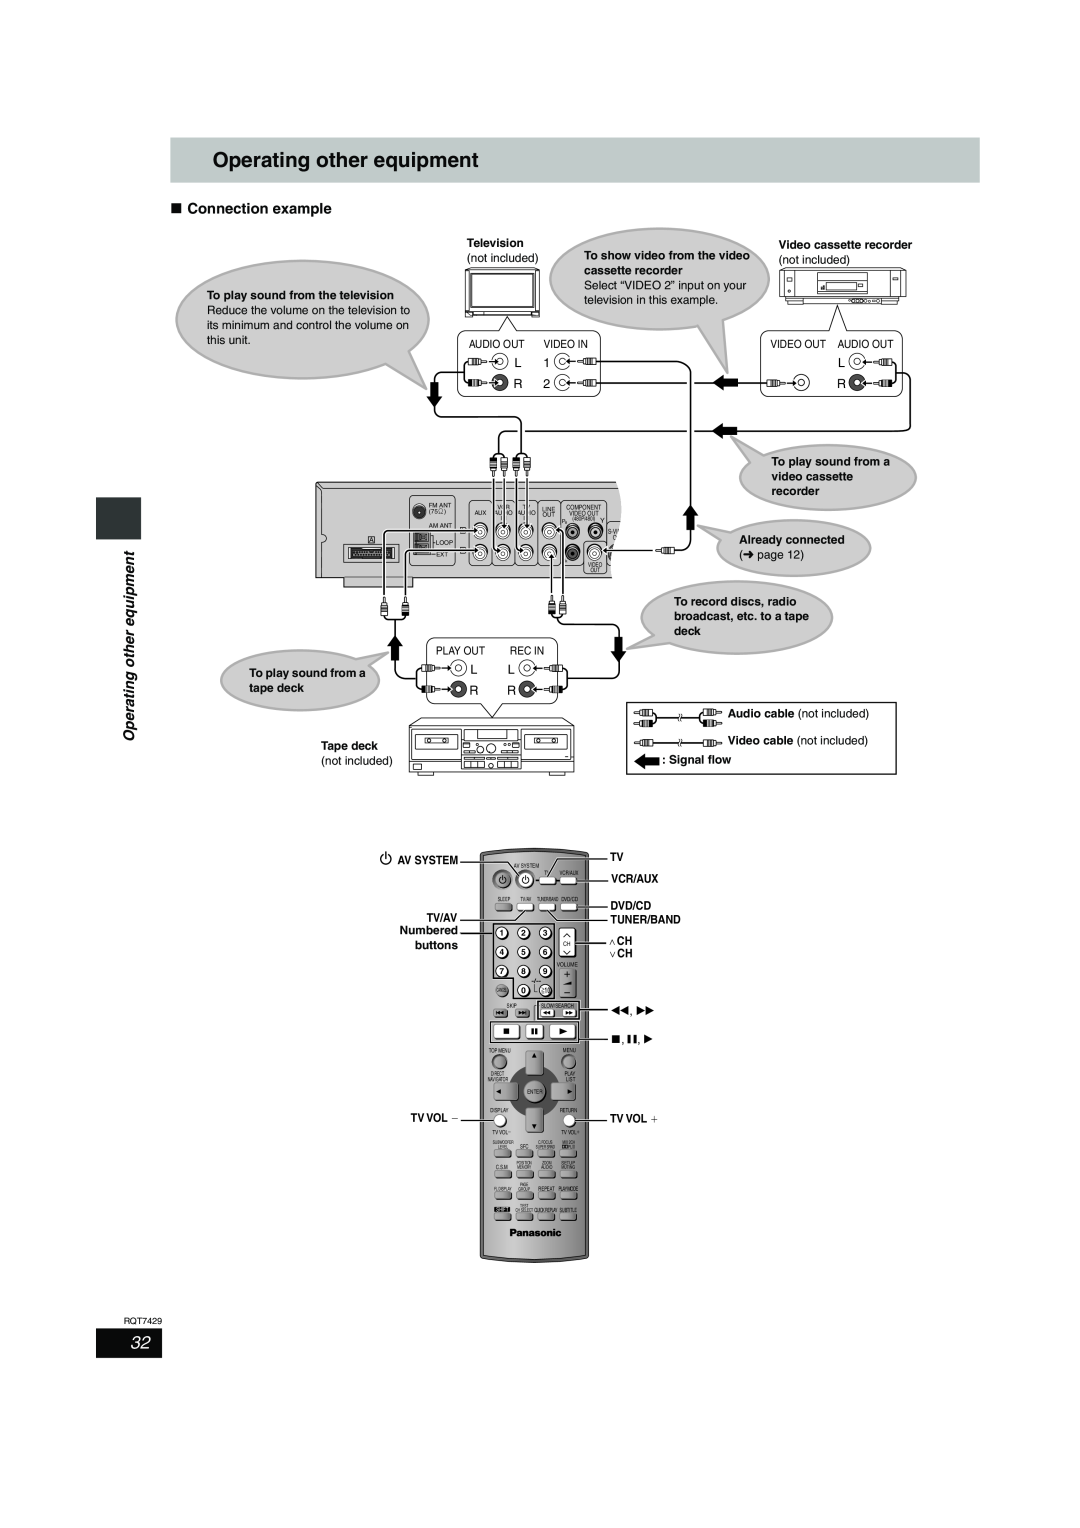 Panasonic GCSEB E specifications Operating other equipment, Connection example 